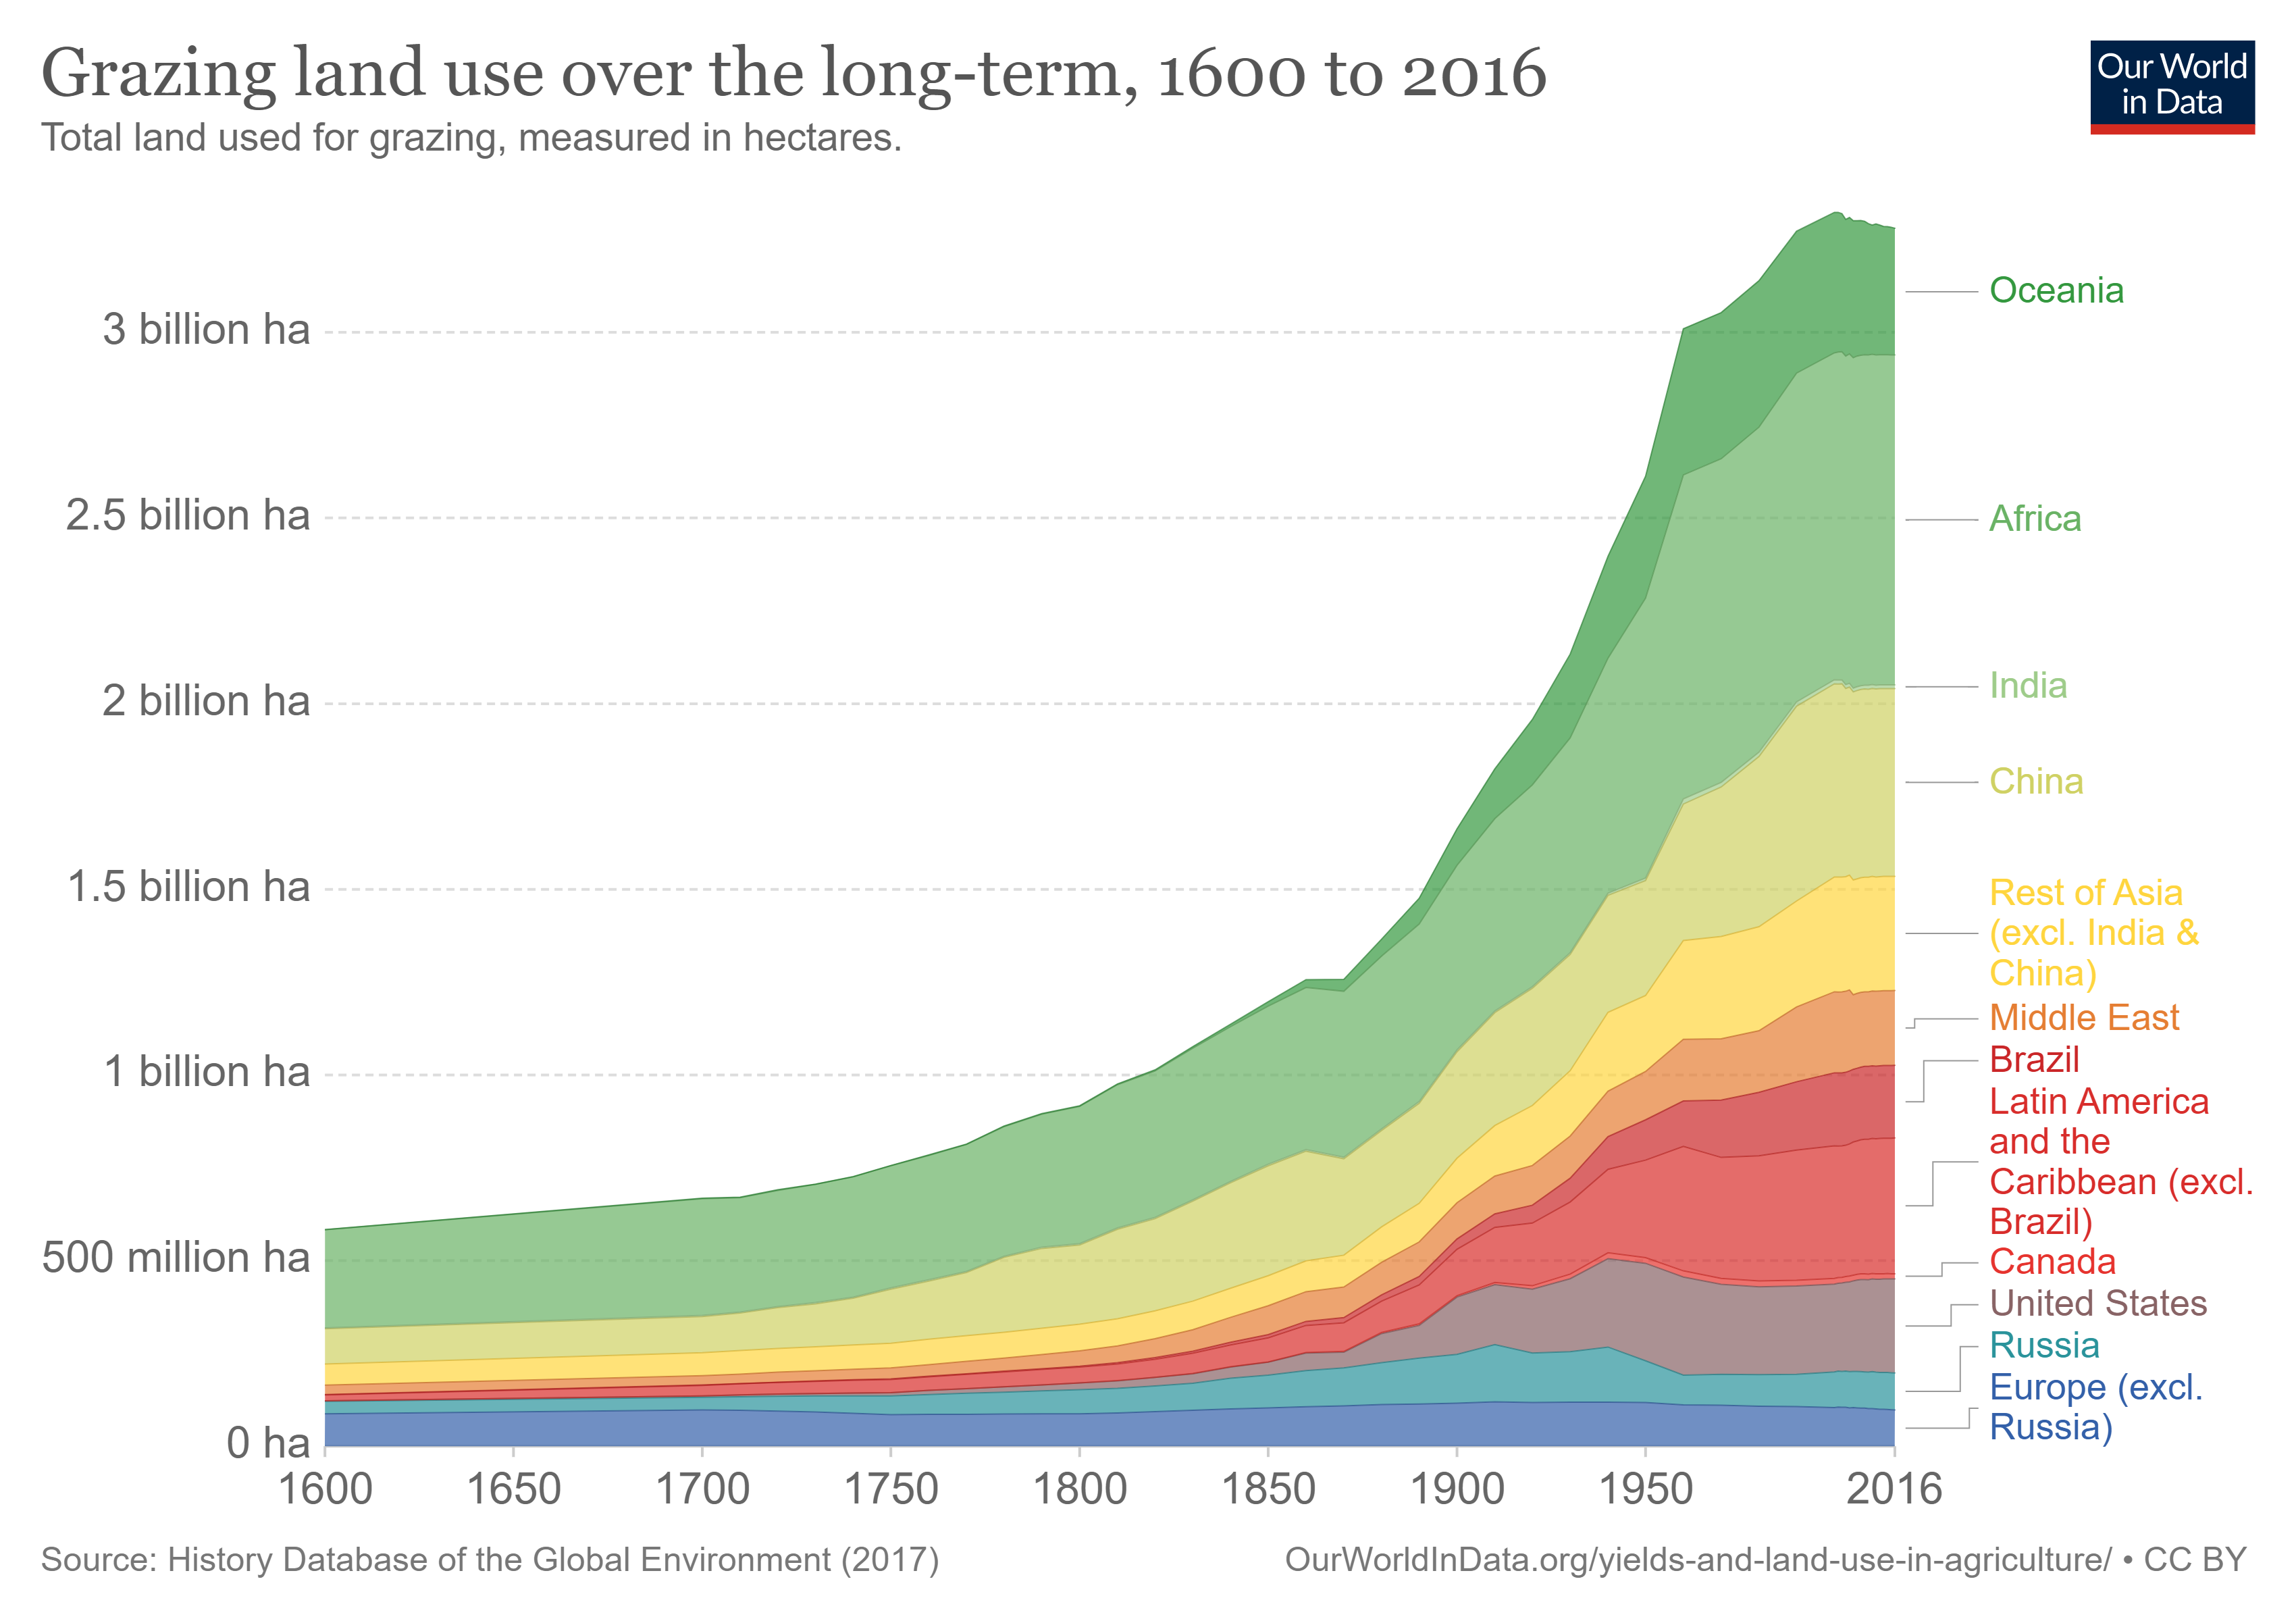 Grazing land use over time